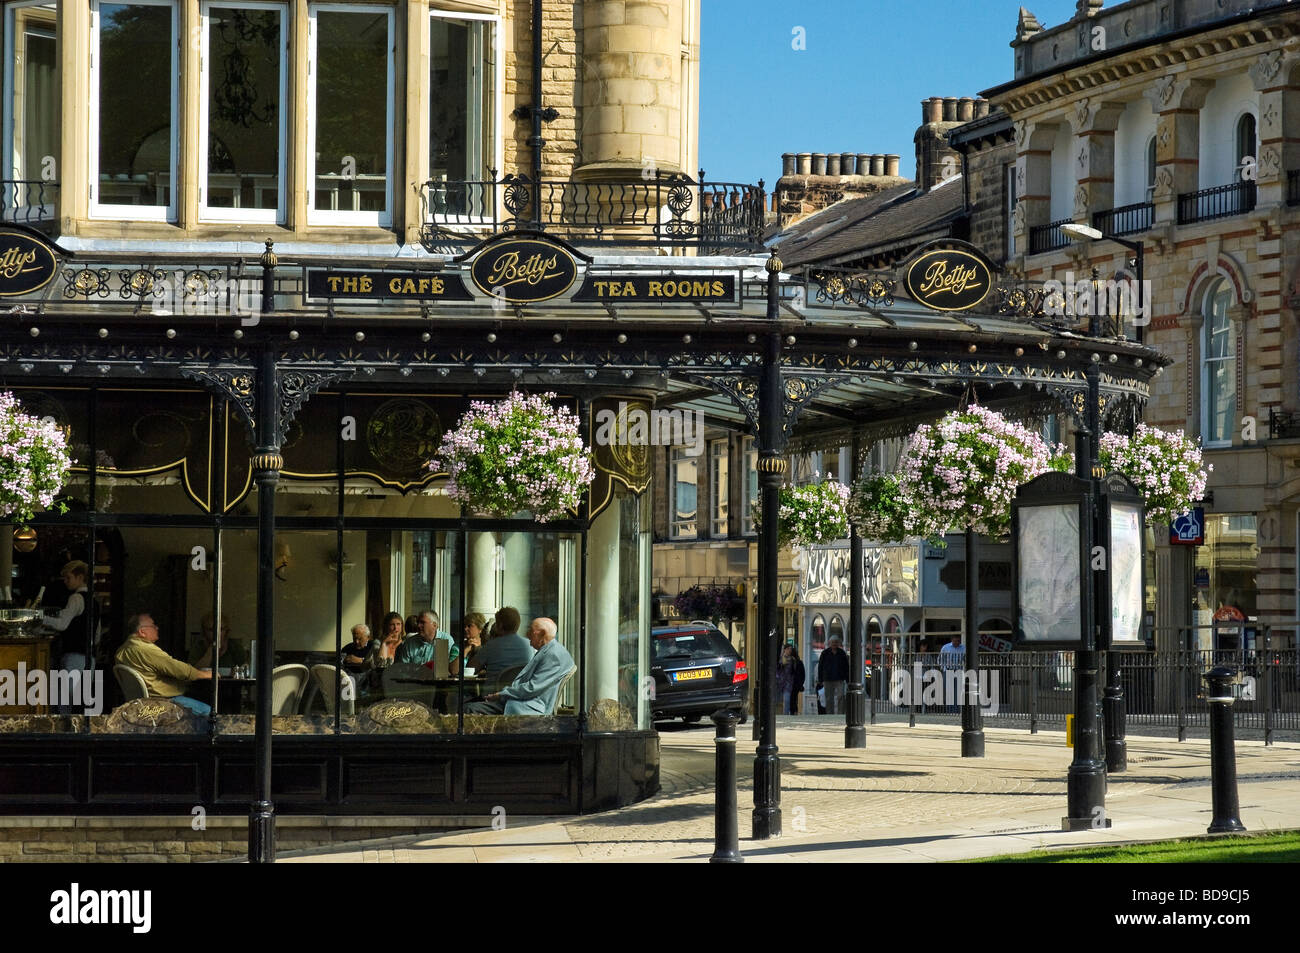 Bettys tea rooms cafe shop in summer on corner of Parliament Street and Montpellier Parade Harrogate North Yorkshire England UK United Kingdom GB Stock Photo